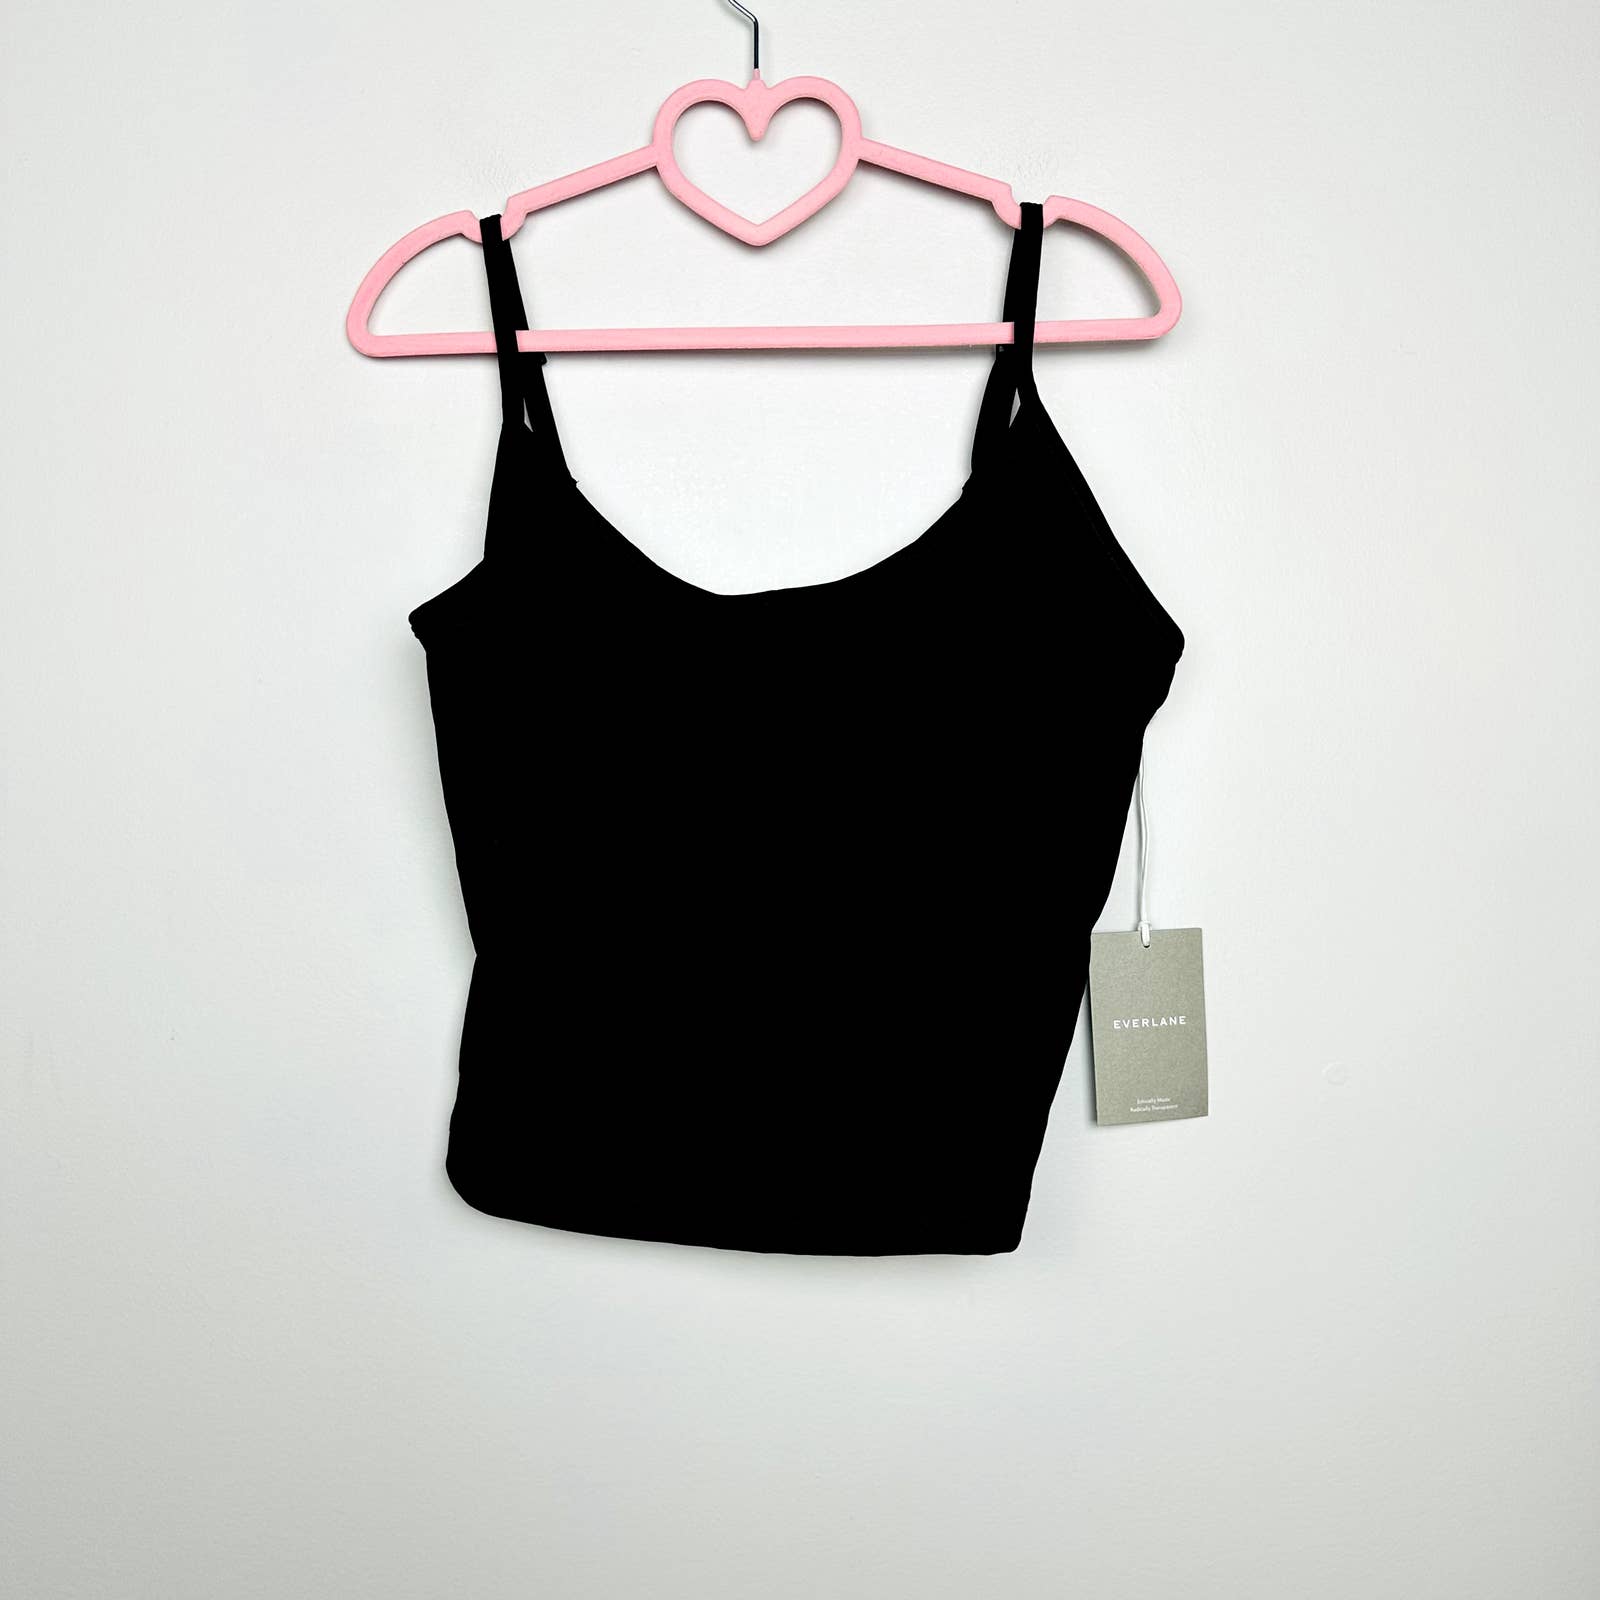 Everlane NWT The Perform Cami Scoop Neck Gym Cropped Tank Top Black Size Large